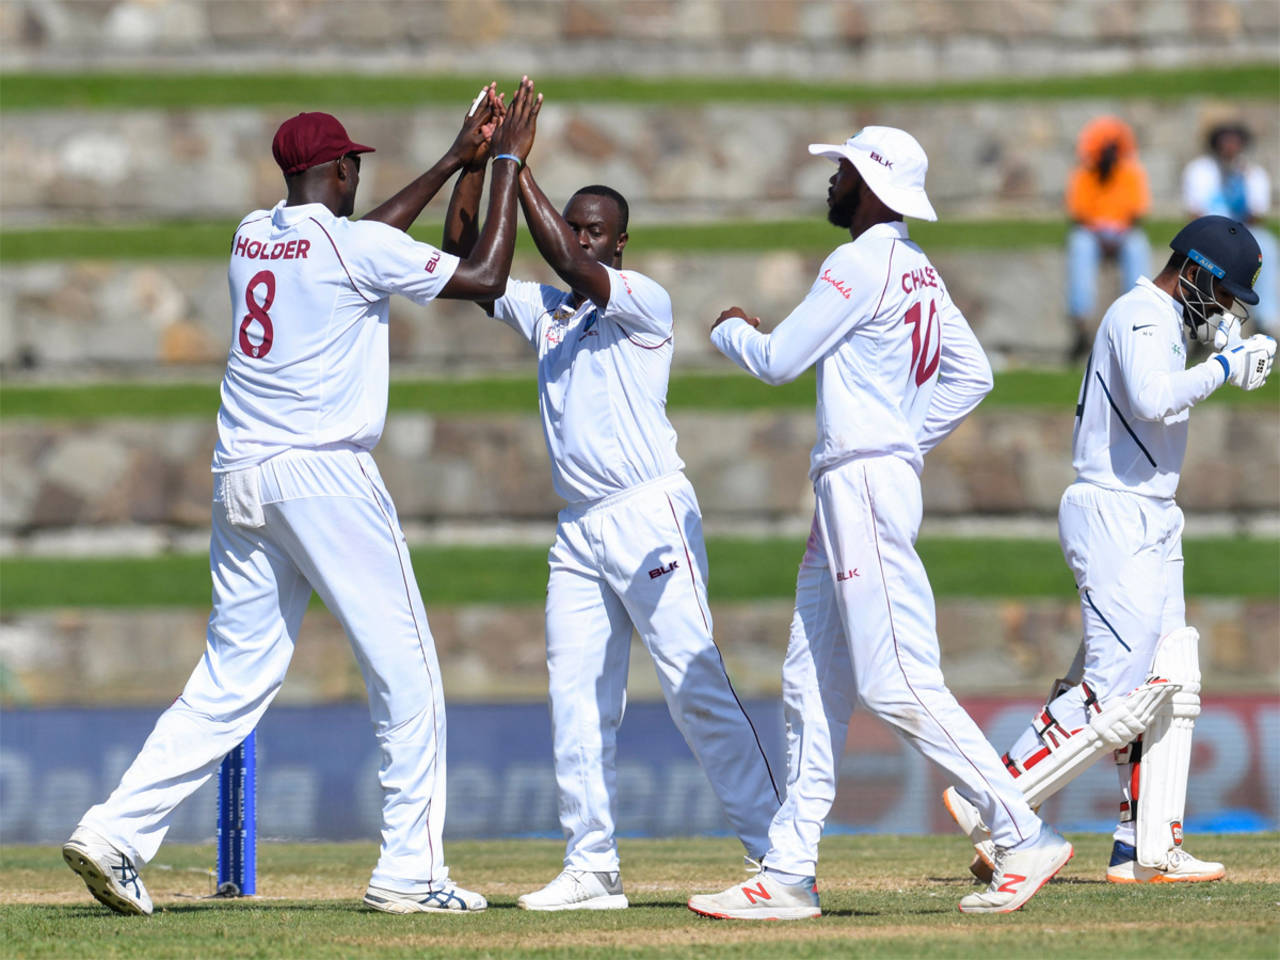 India vs West Indies Highlights, 1st Test Day 1 India 203/6 at stumps Cricket News